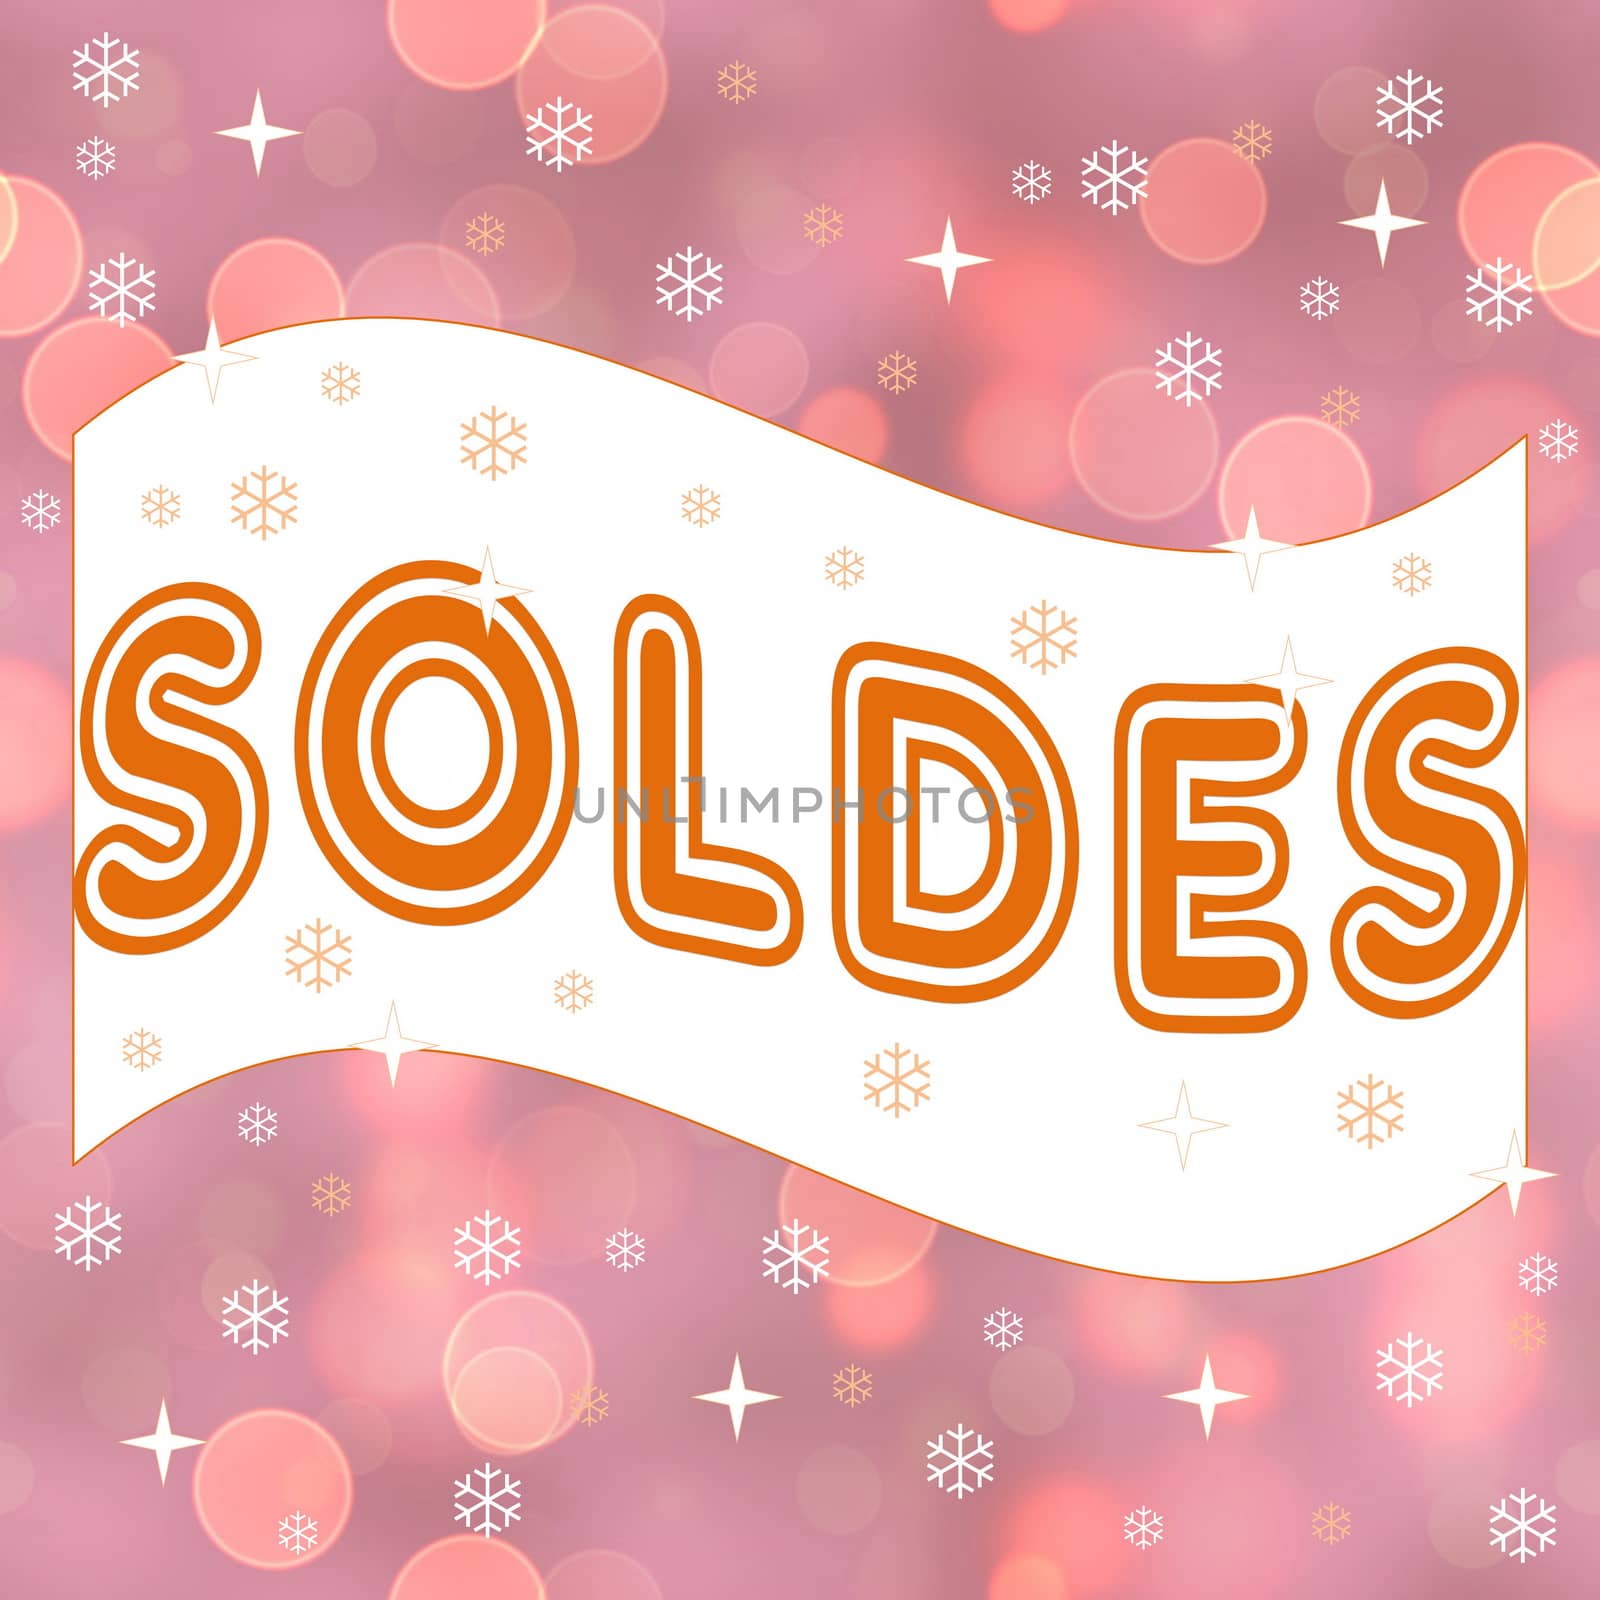 French winter sale, soldes by Elenaphotos21